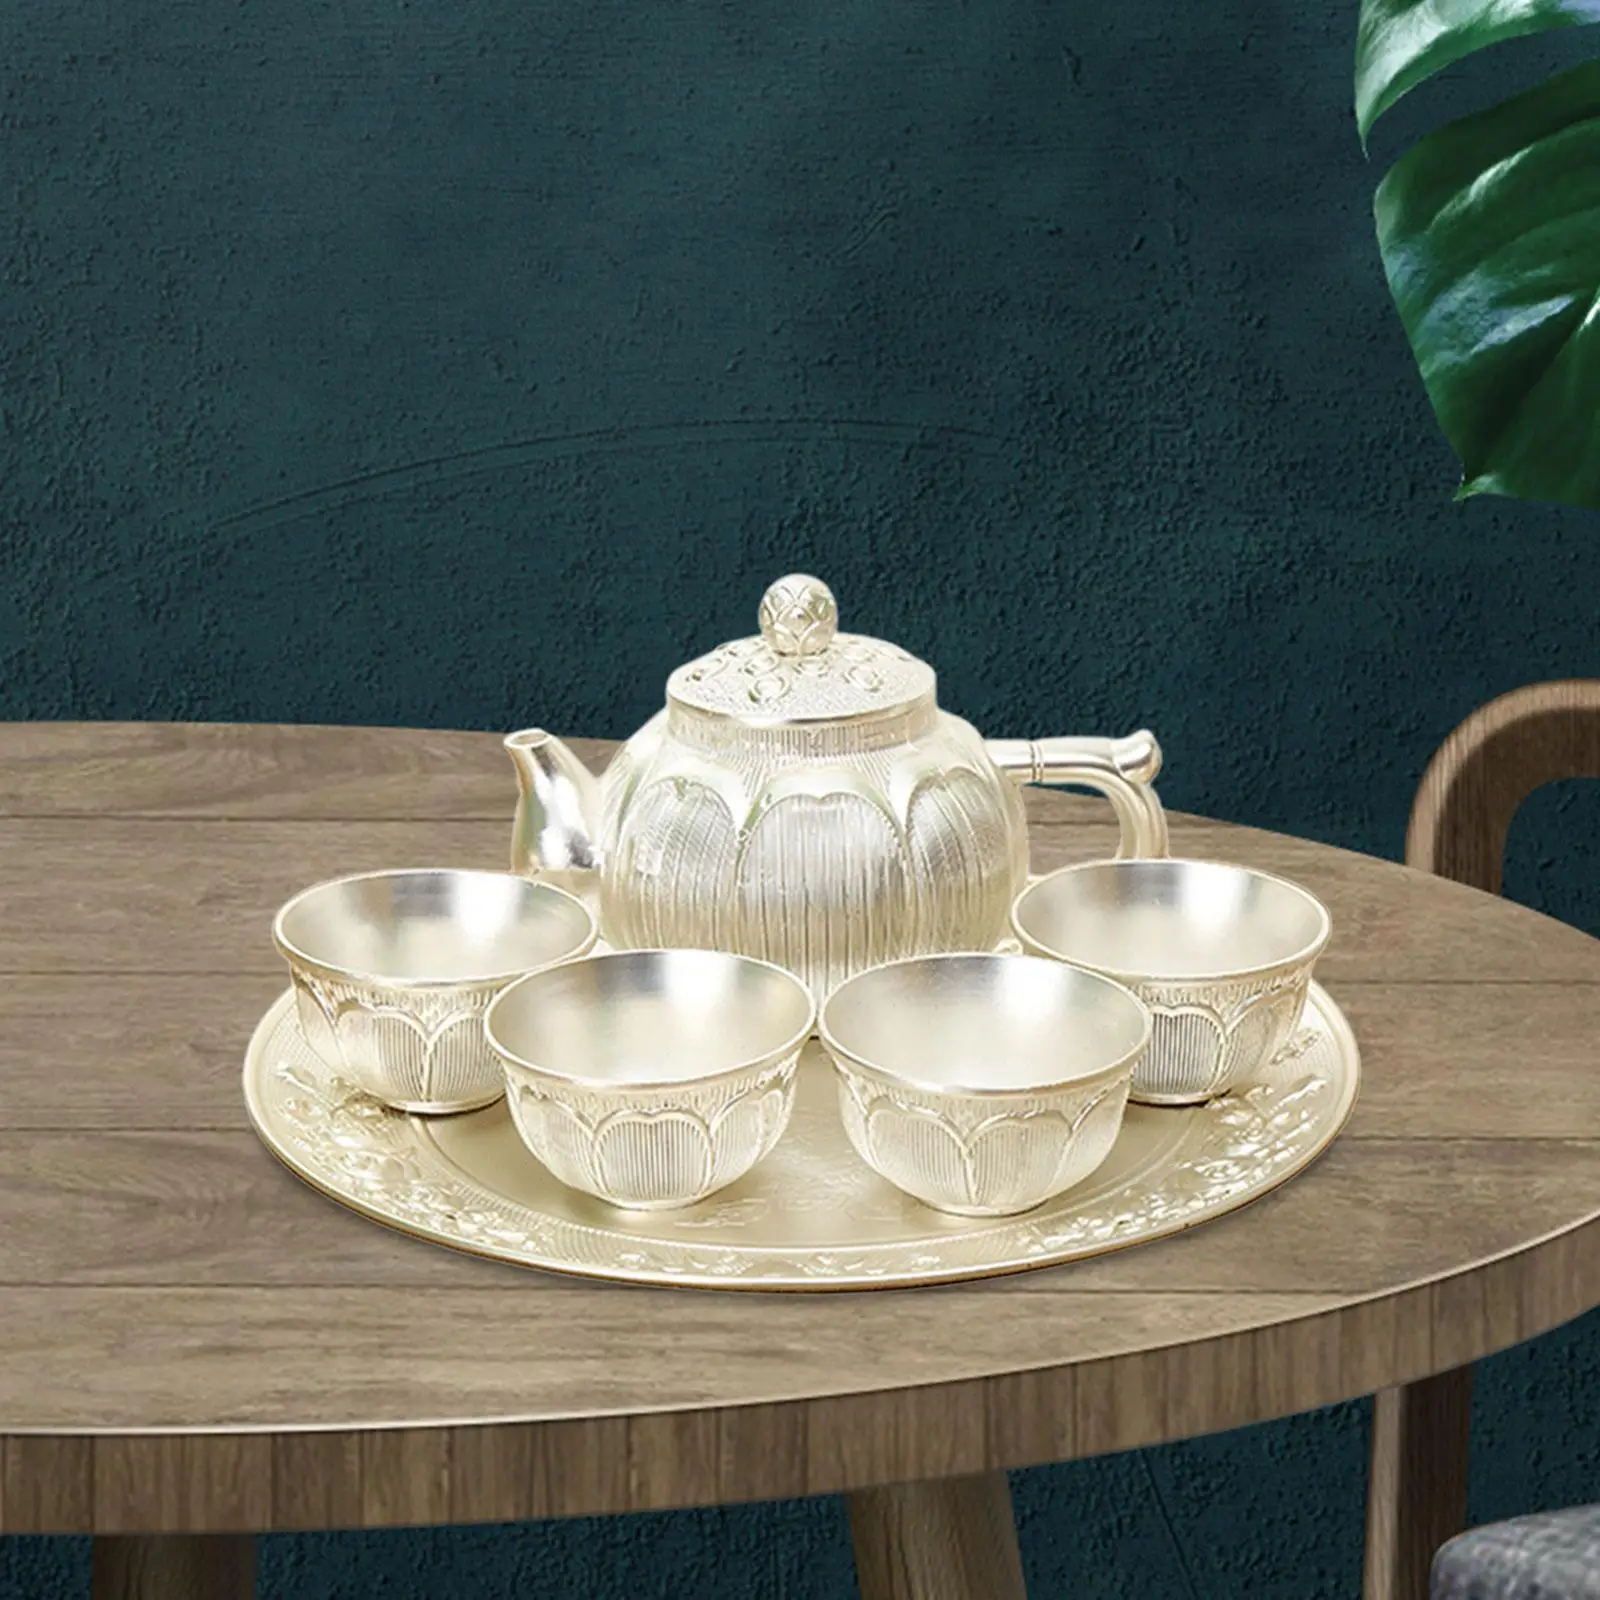 6x Afternoon Party Tea Set Zinc Alloy Tea Cup Set Handmade Vintage for Birthday Weddding Thanksgiving Adults Gifts